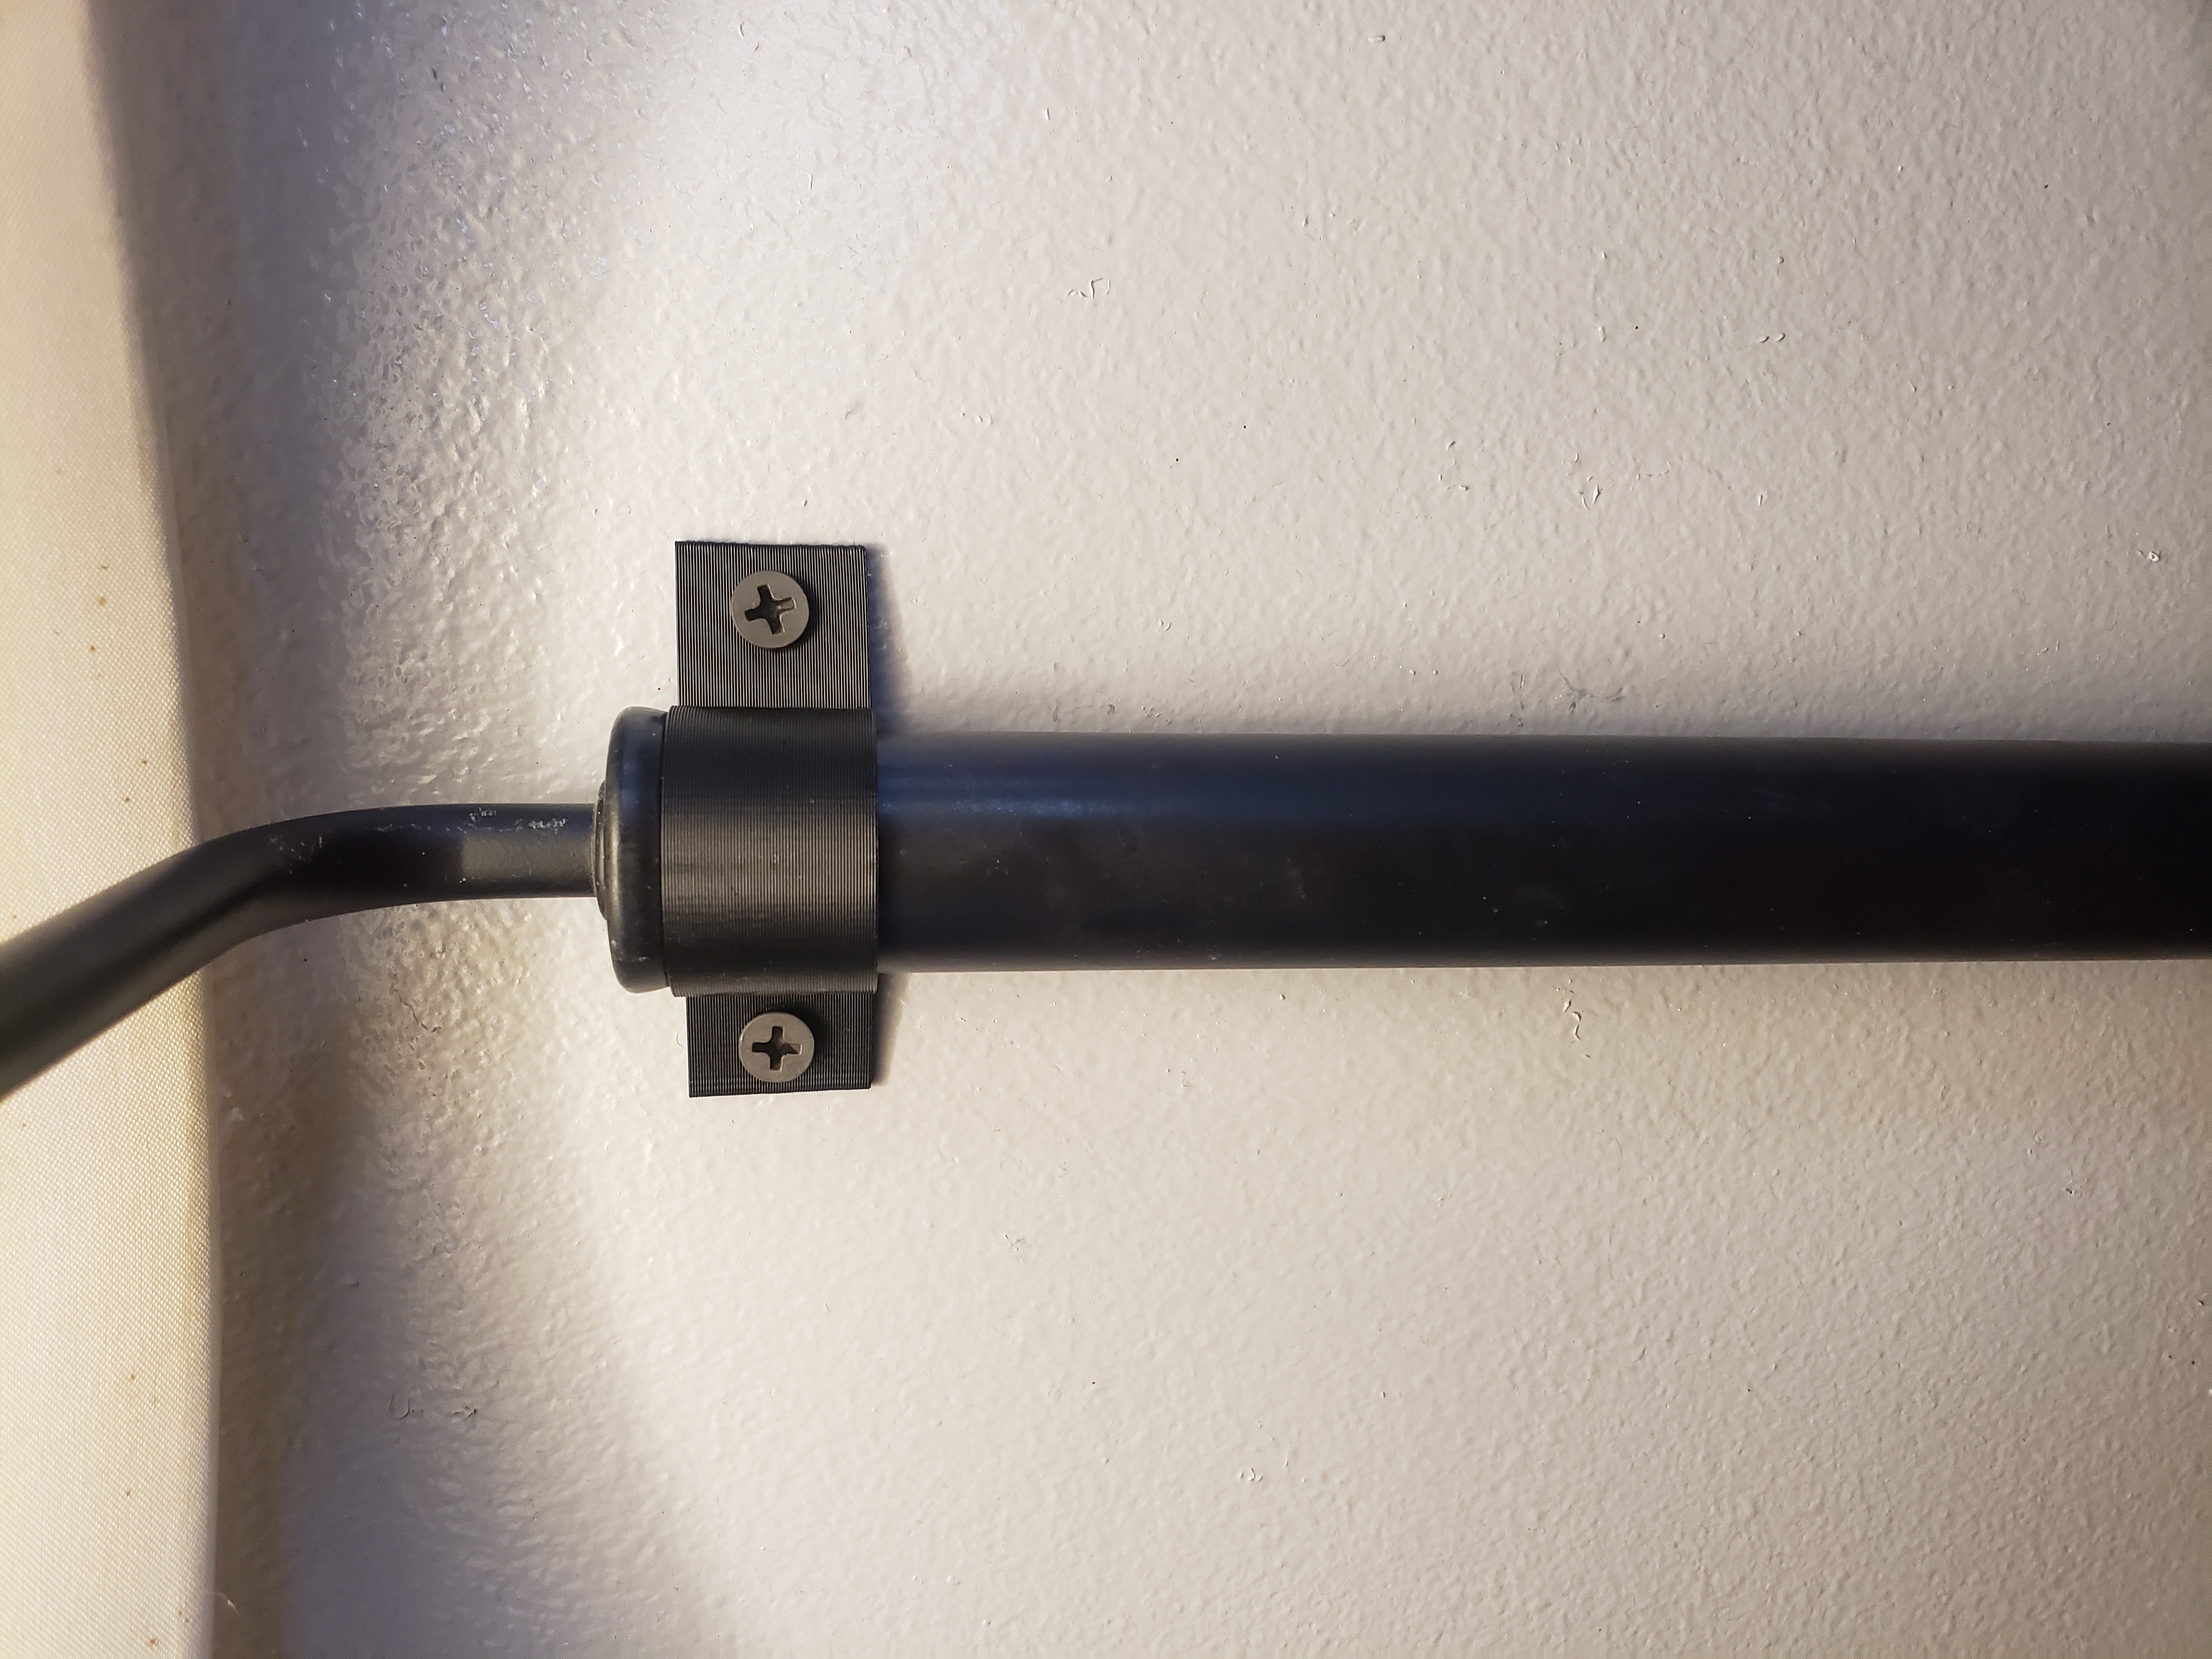 A clamp I made to hang a lamp rod on the wall that came off an old end table